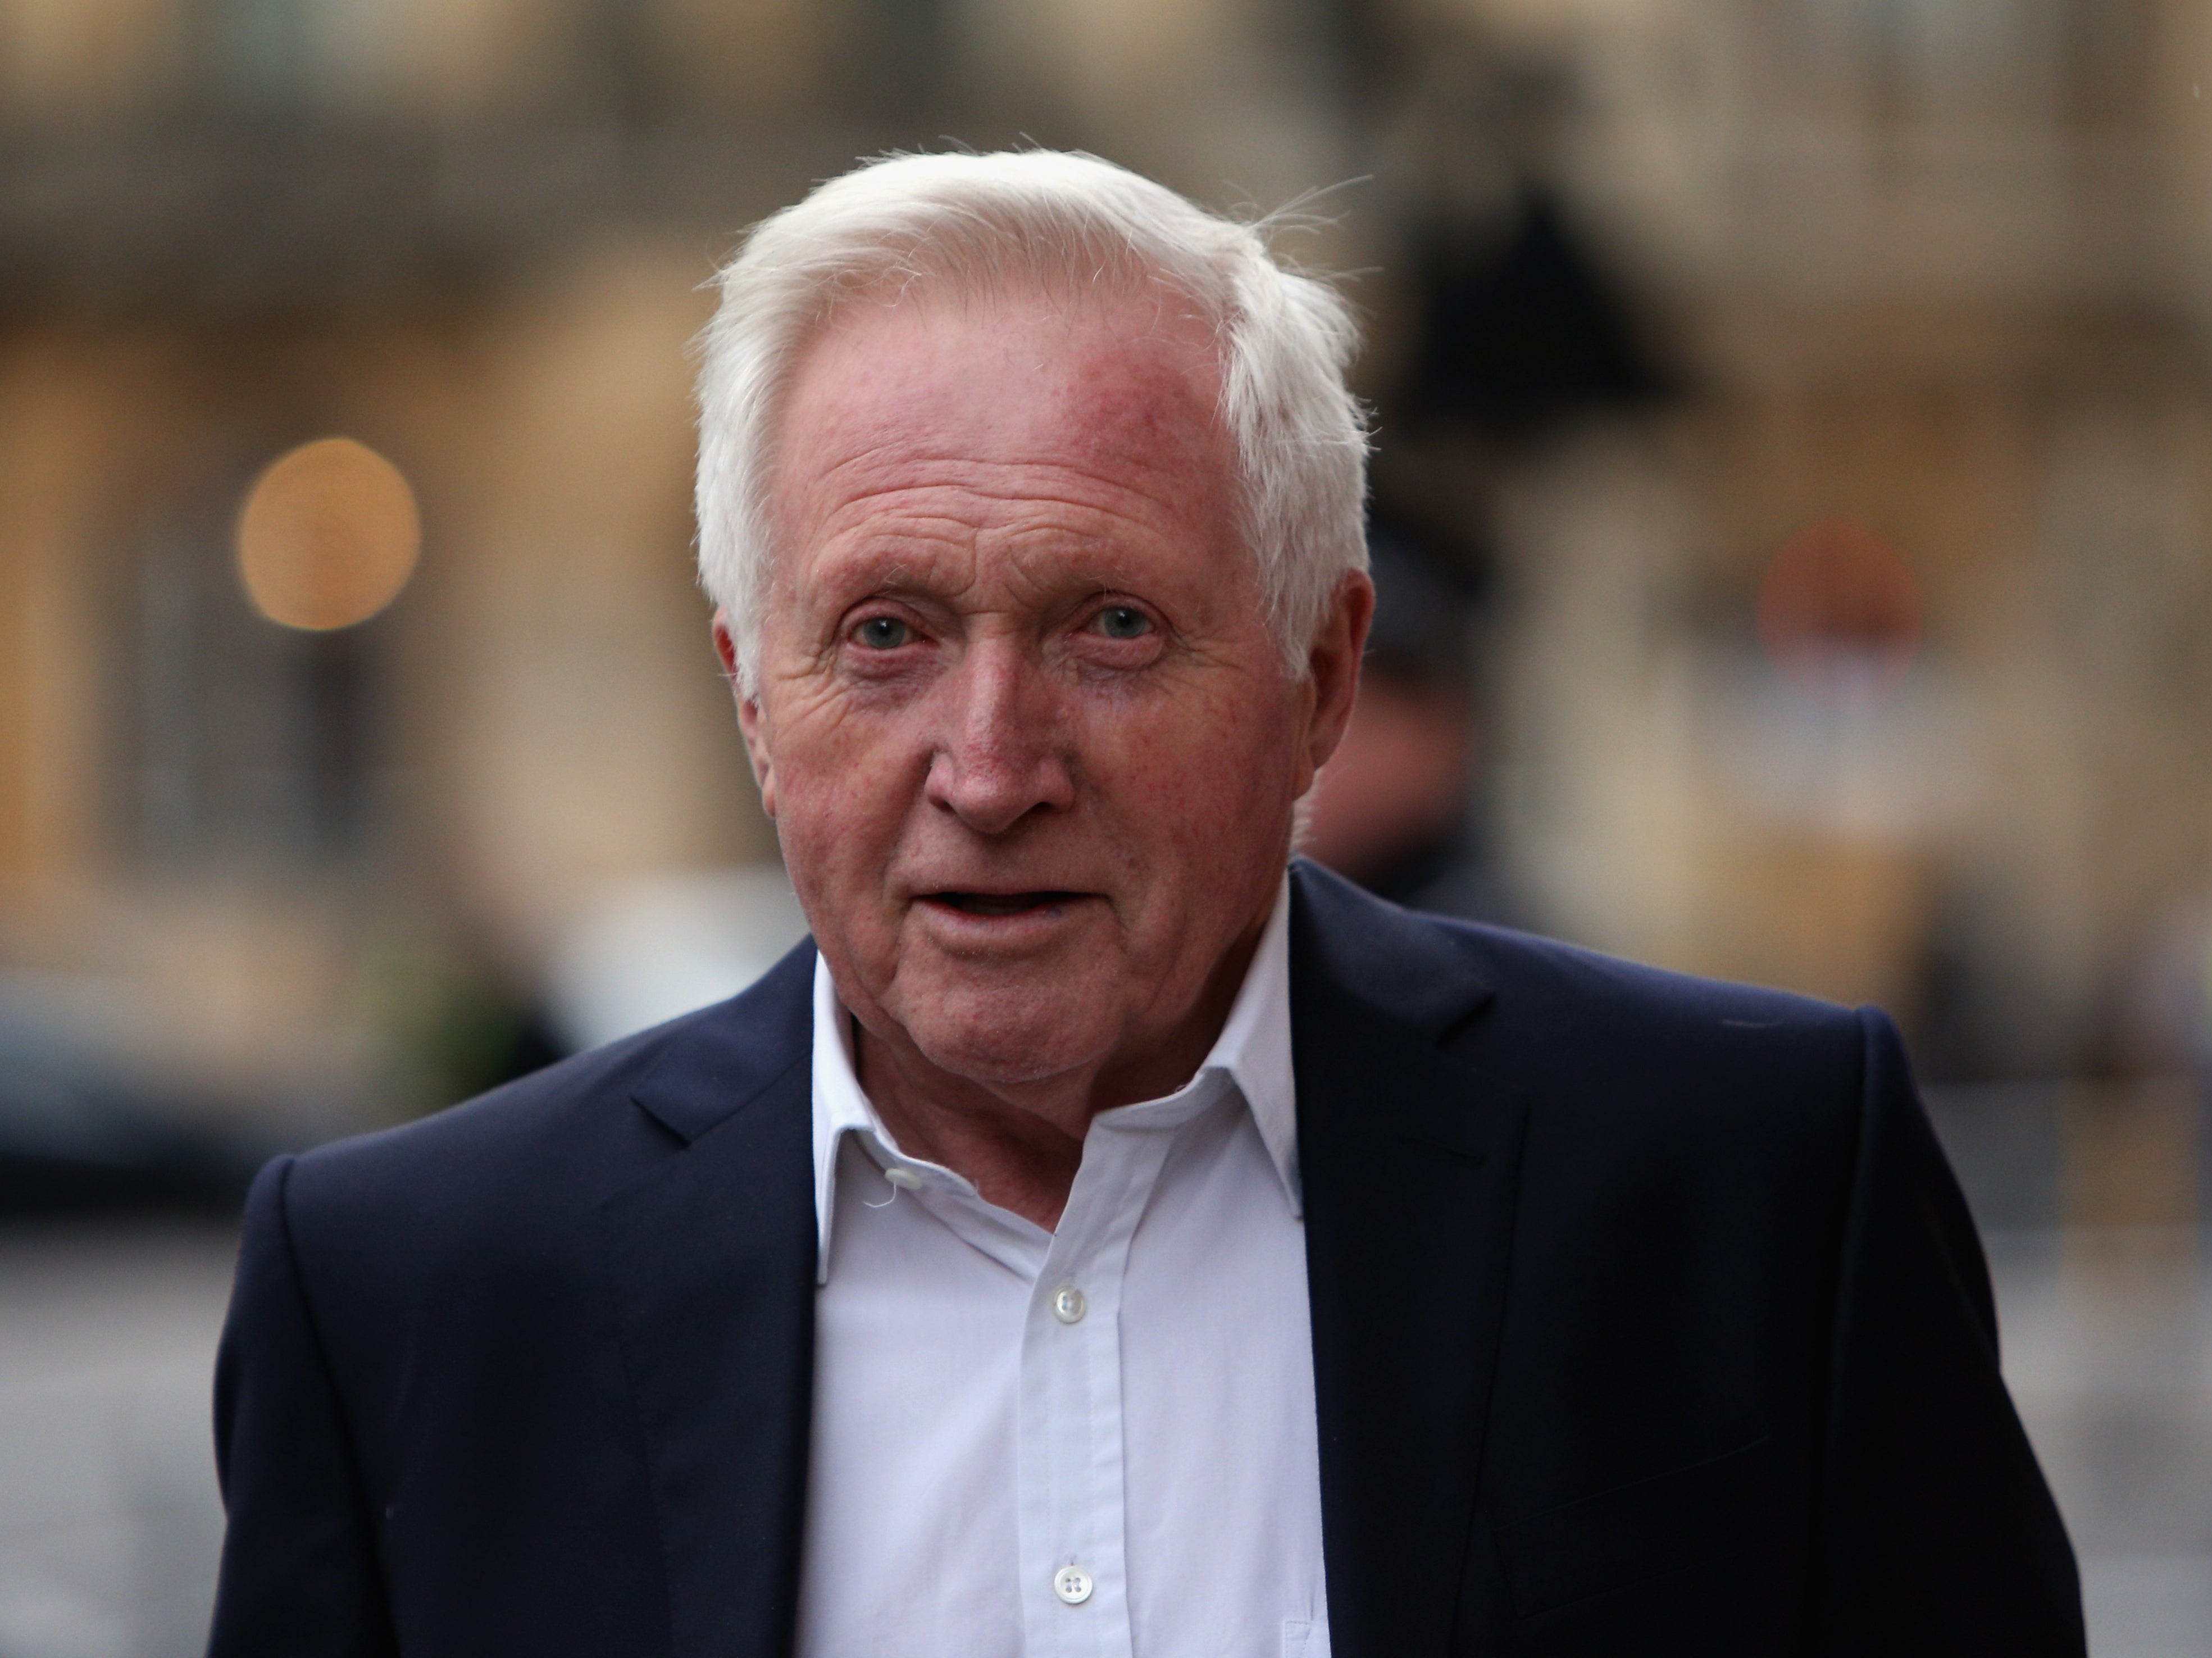 Dimbleby said politicians refused to go on his show when their profile became big enough